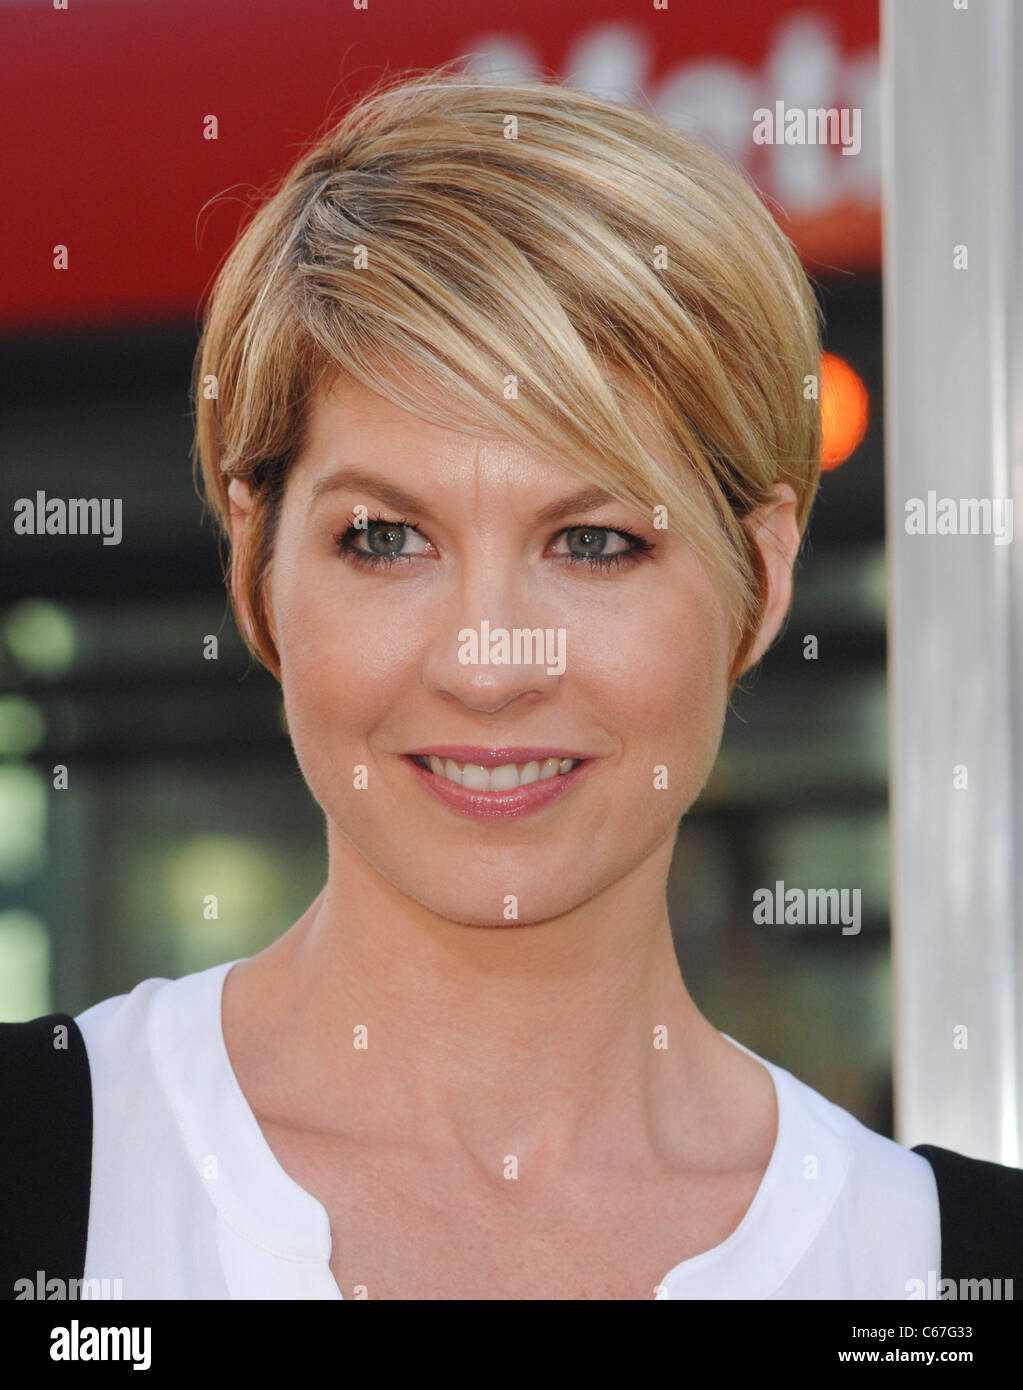 Jenna Elfman at arrivals for HORRIBLE BOSSES Premiere, Grauman's Chinese Theatre, Los Angeles, CA June 30, 2011. Photo By: Elizabeth Goodenough/Everett Collection Stock Photo